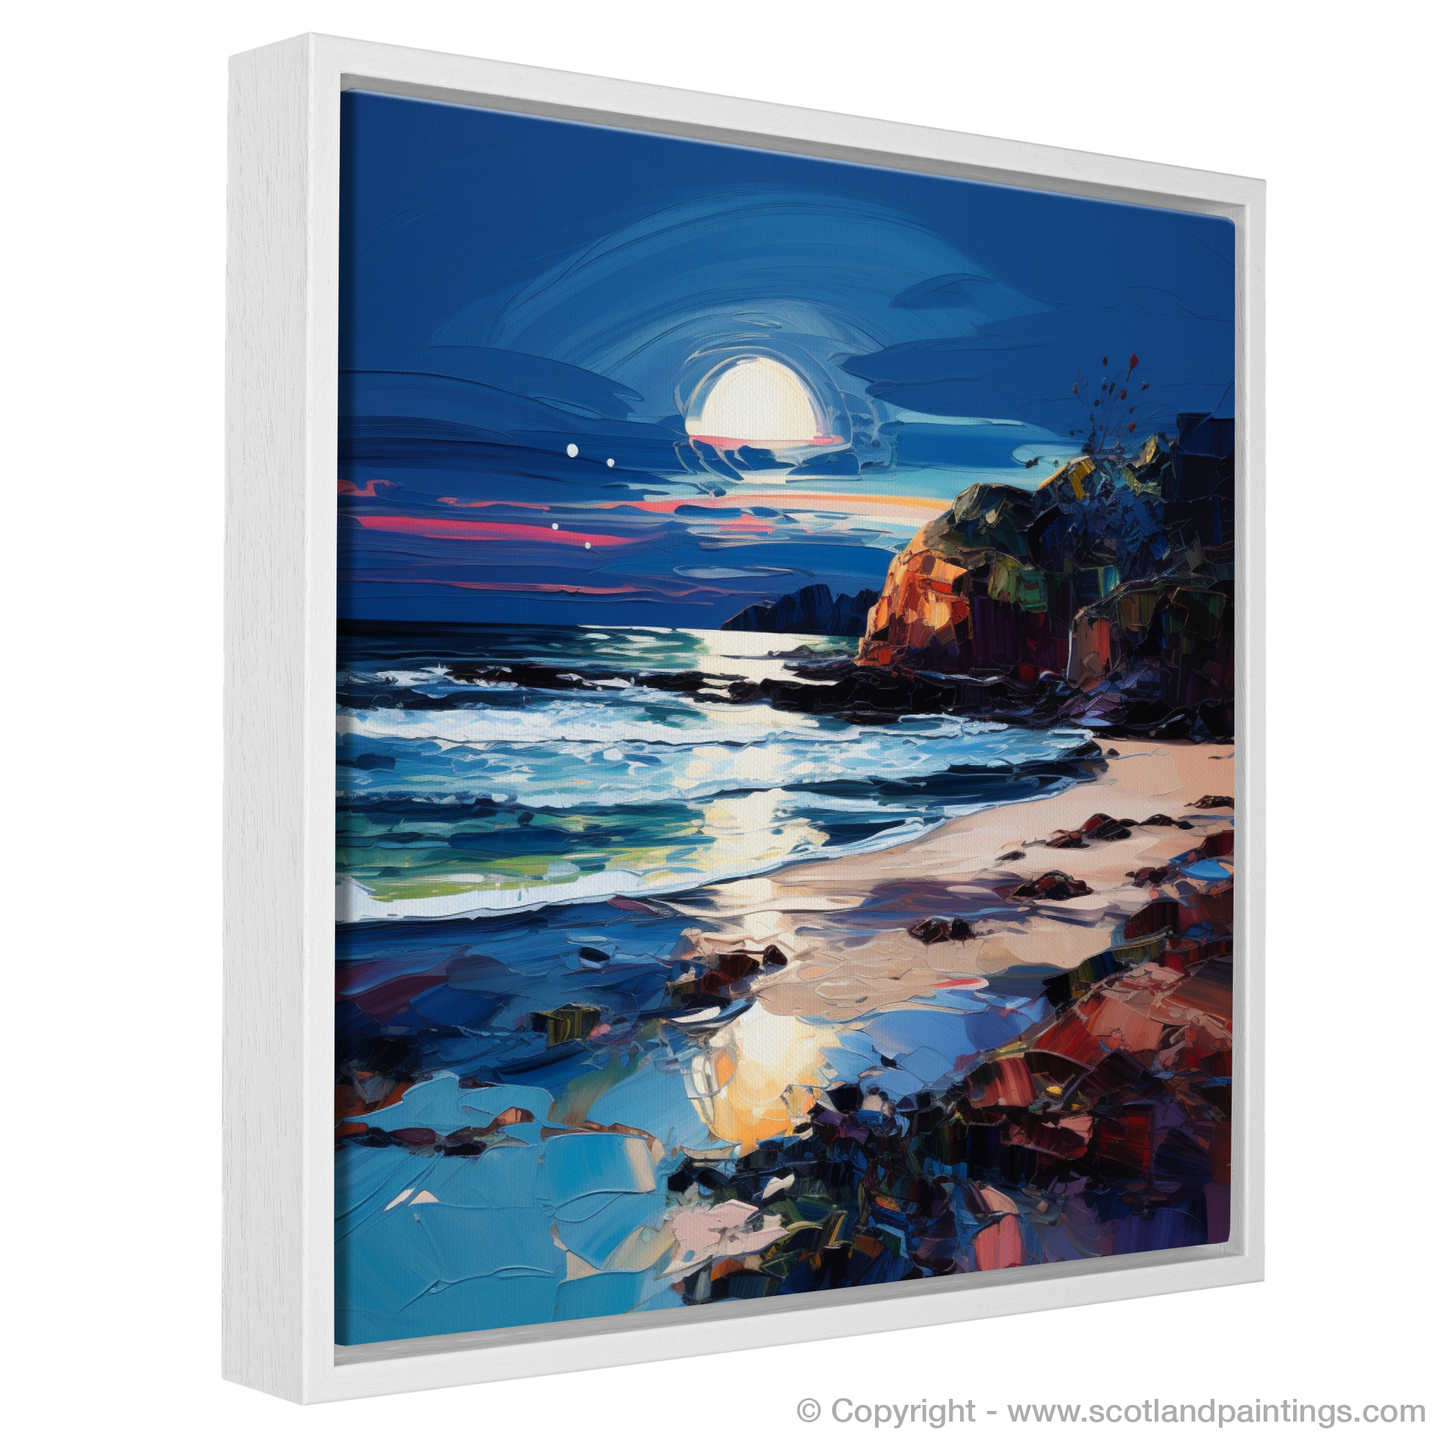 Painting and Art Print of Seilebost Beach at dusk entitled "Dusk Enchantment at Seilebost Beach".